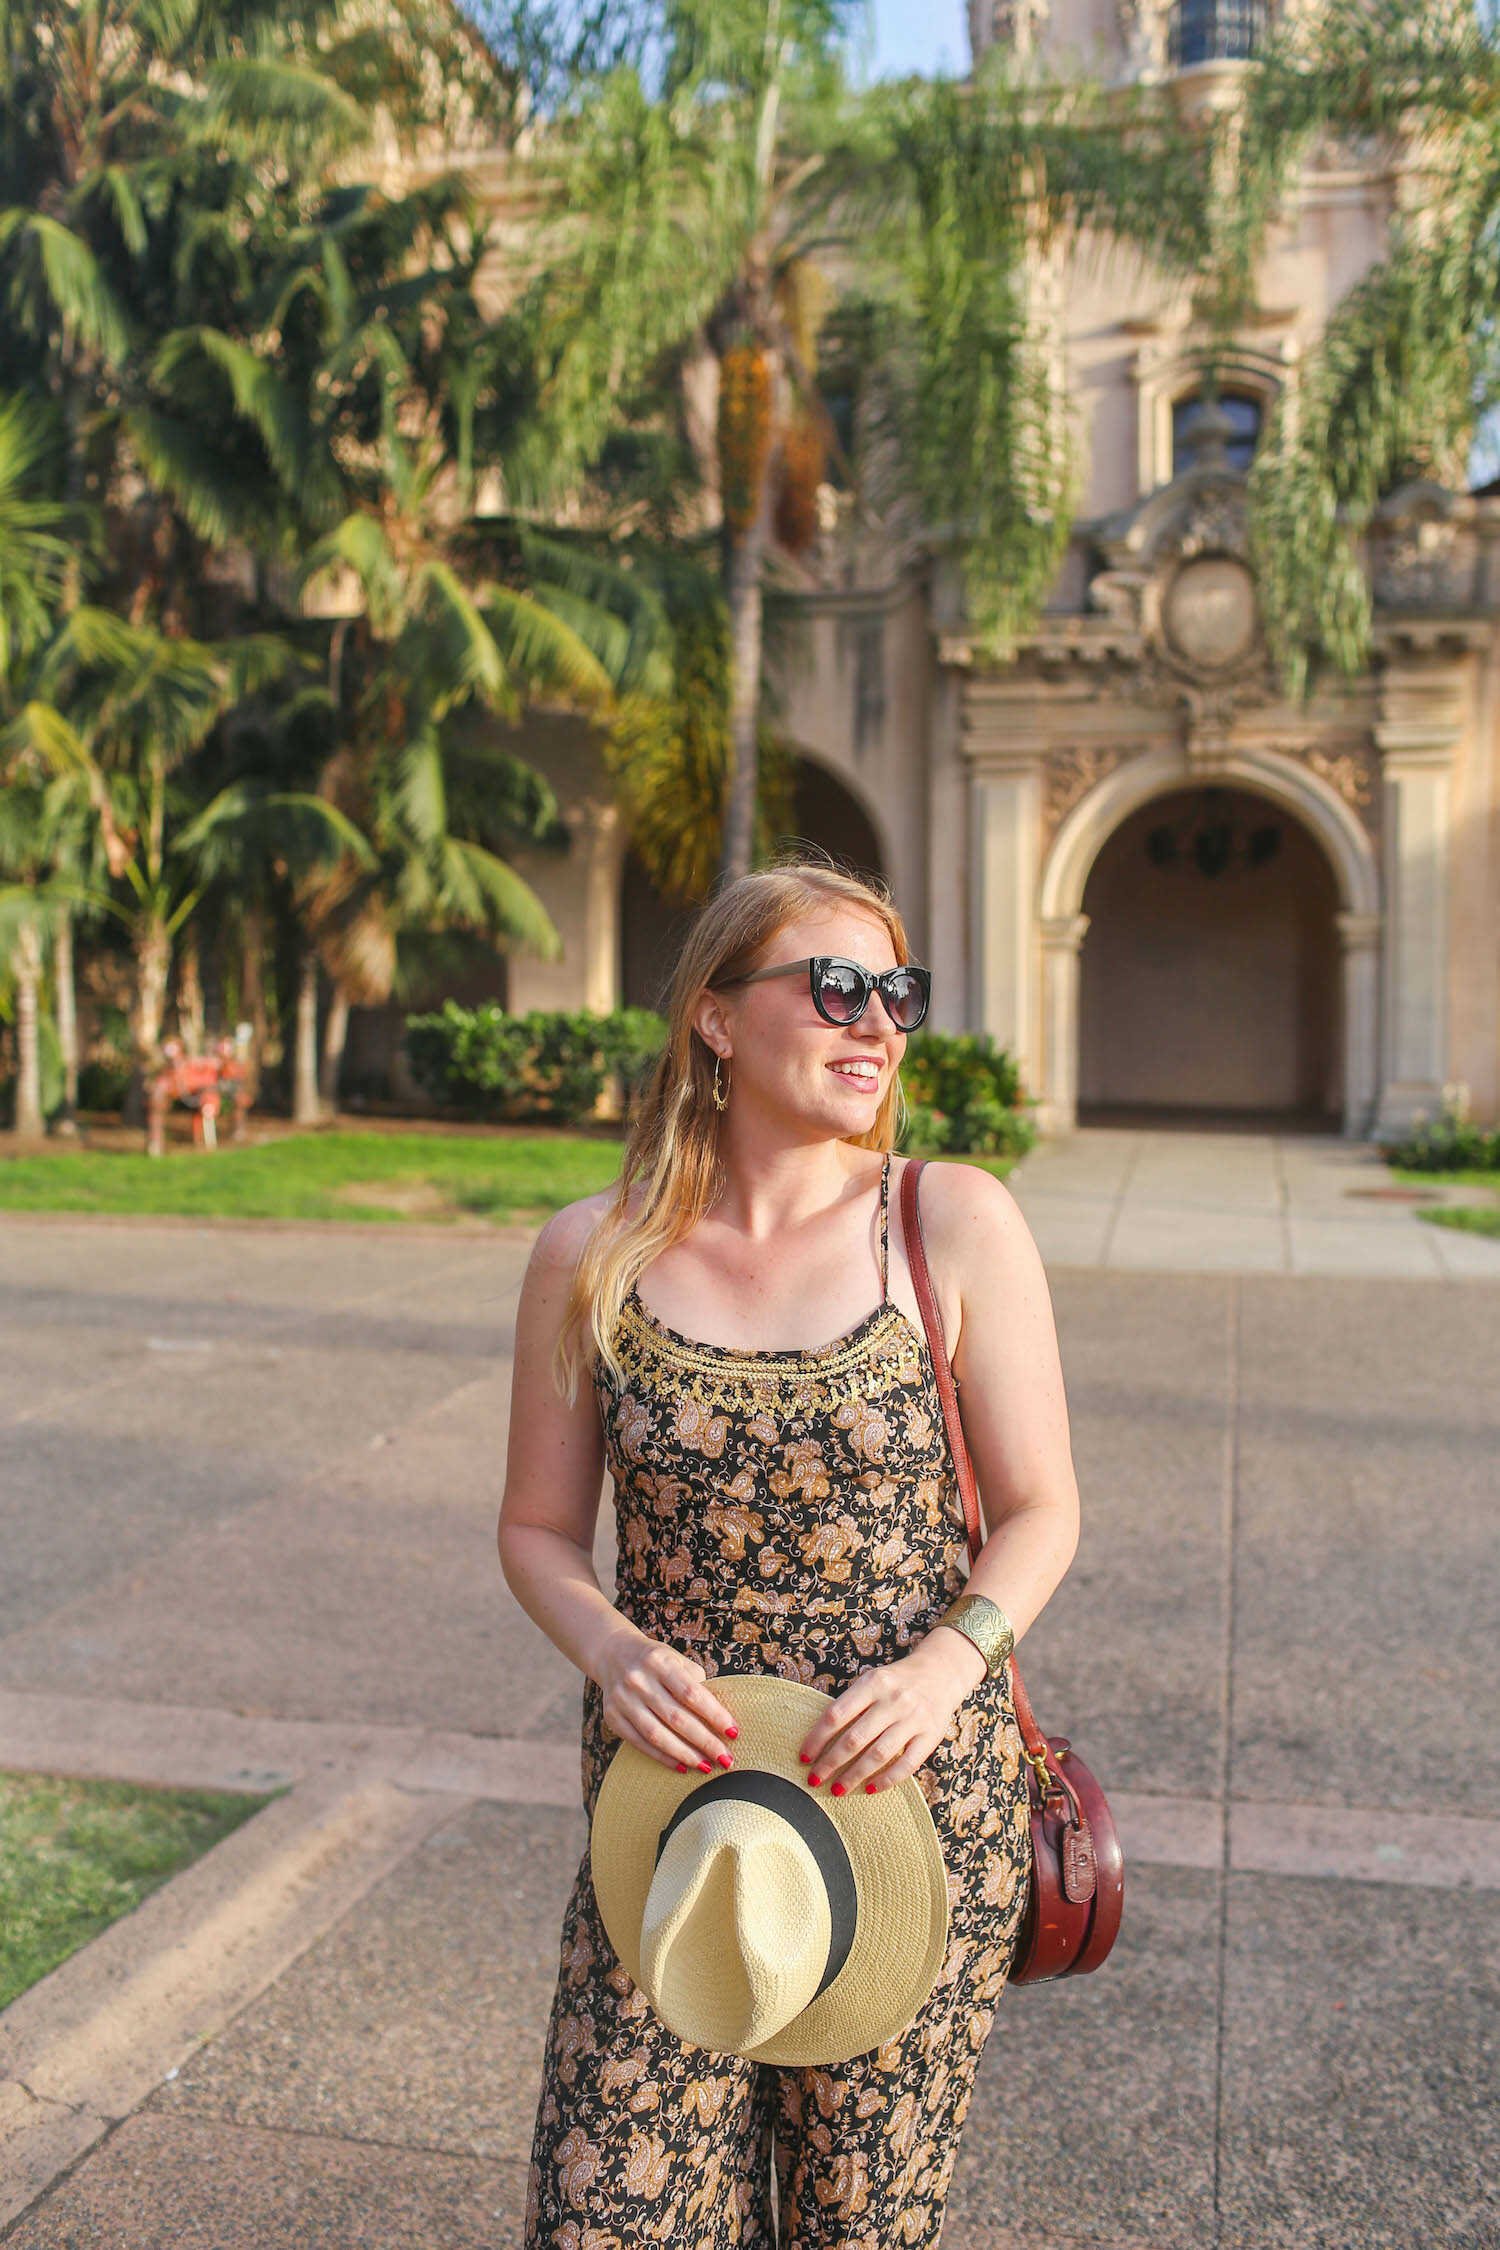 Beautiful Places in San Diego to Take Family Pictures - Spanish Colonial architecture inside Balboa Park.